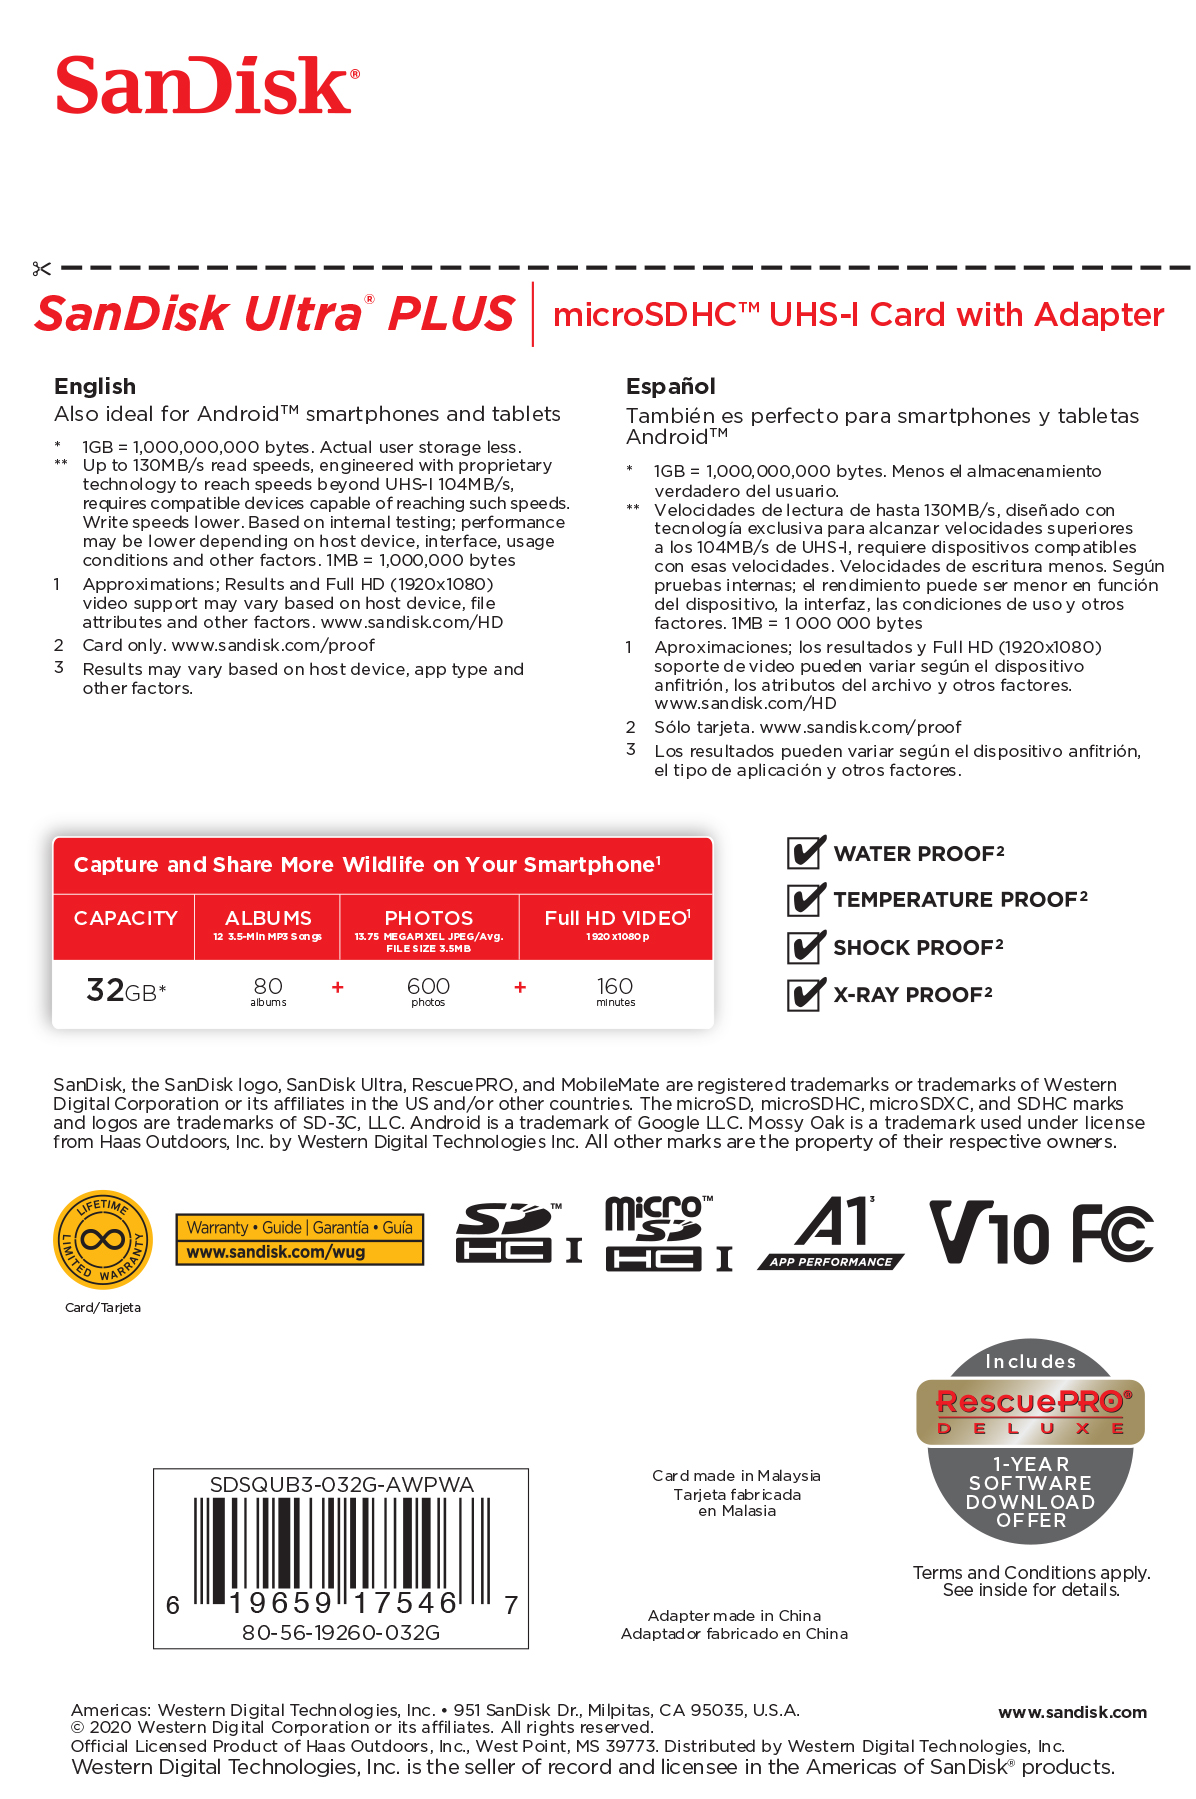 SanDisk Ultra® Plus MicroSDHC™ UHS-I Card, 32GB with Adapter - image 2 of 5